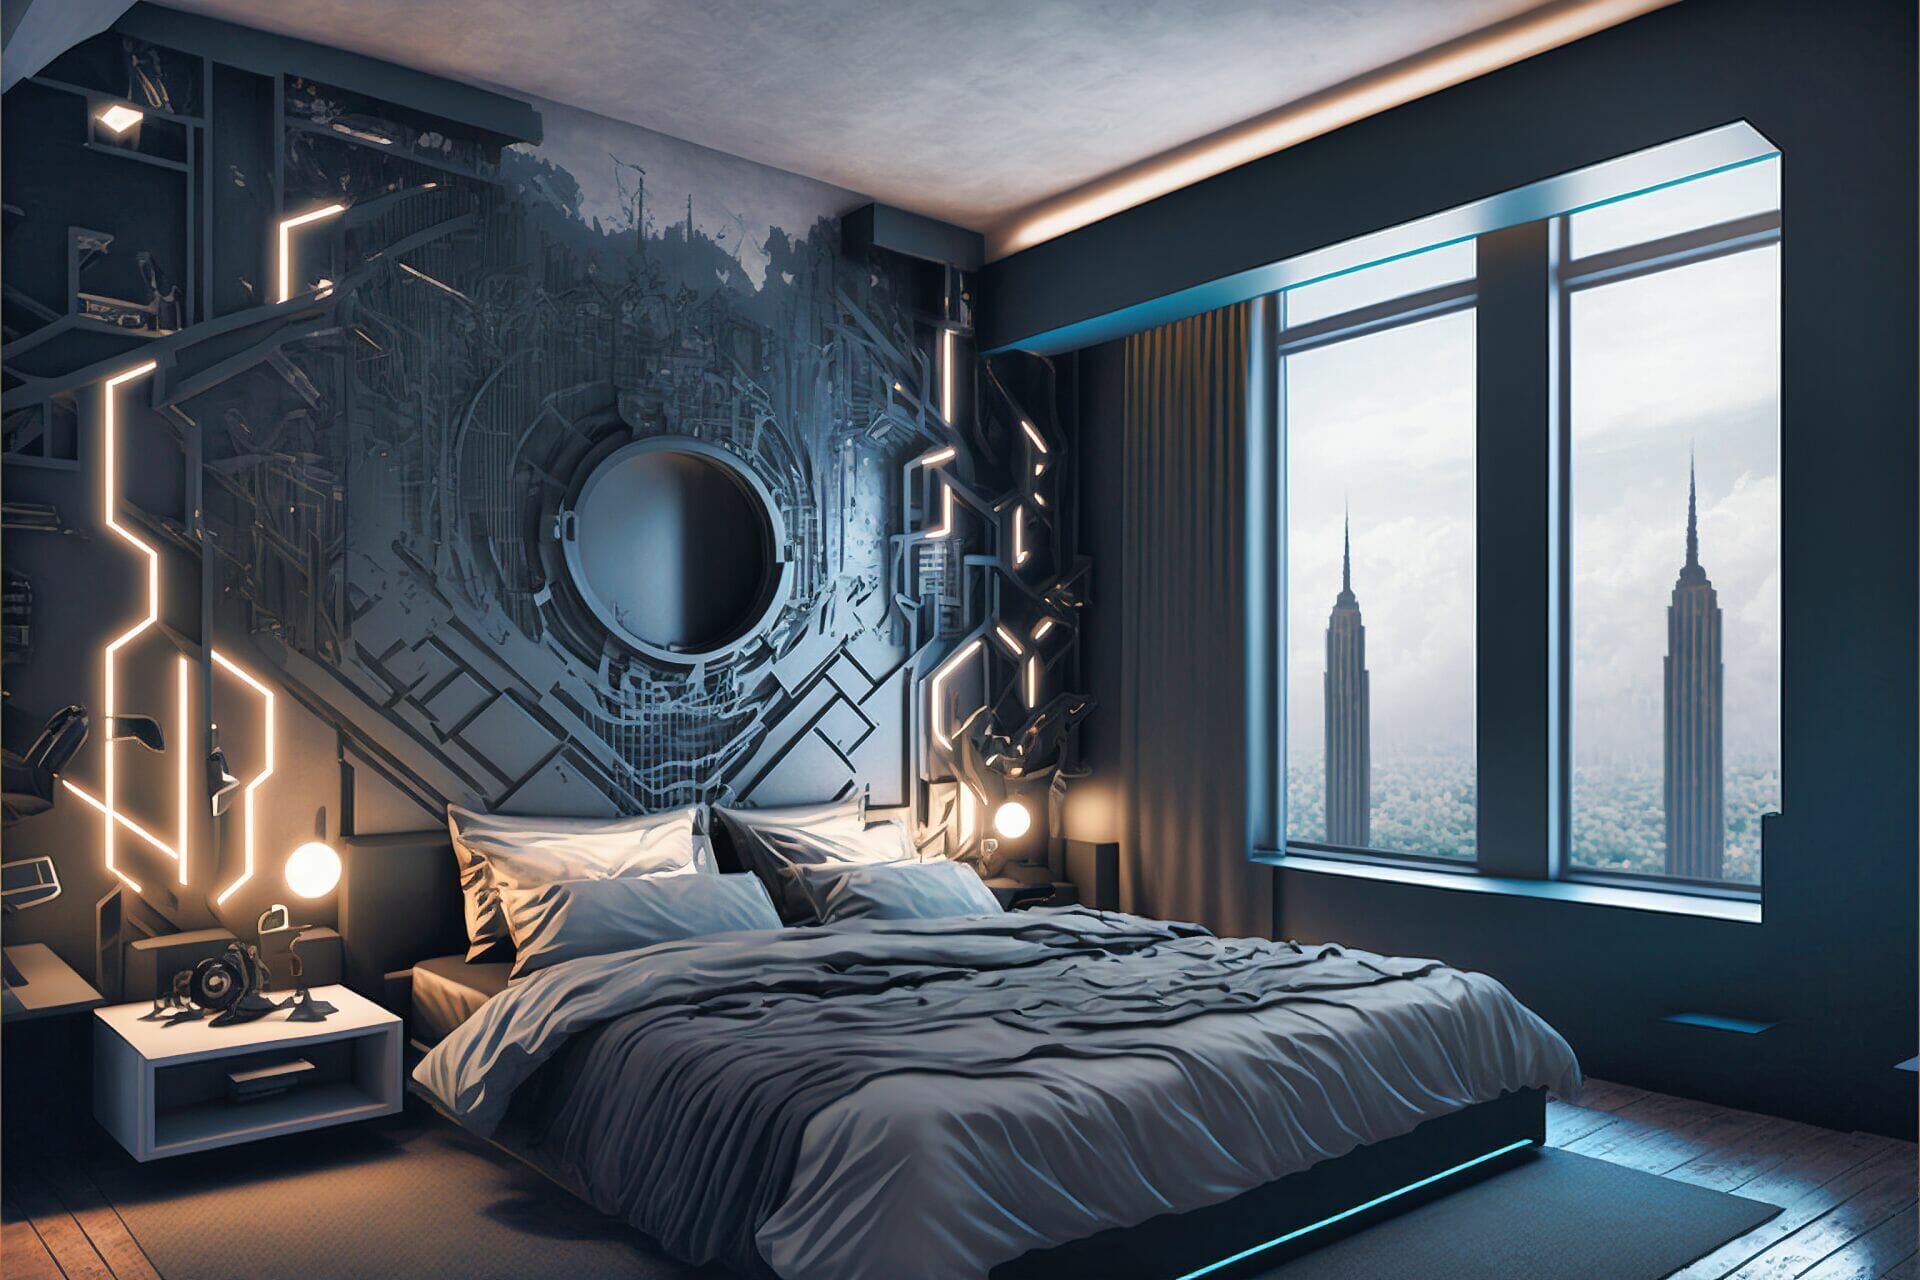 Bedroom With A Futuristic Industrial Edge. The Walls Are Painted A Deep Steel Grey, With Metallic Accents And A Large Mural Depicting A Futuristic Cityscape. The Center Of The Room Features A Large, Black Bed, With A Matching Bed Frame And Nightstands. The Lighting Is Low And Ambient, With A Light Strip Running Along The Walls, And A Hanging Neon Bulb Providing The Main Lighting Source. The Floor Is An Industrial Tile With A Matte Finish.